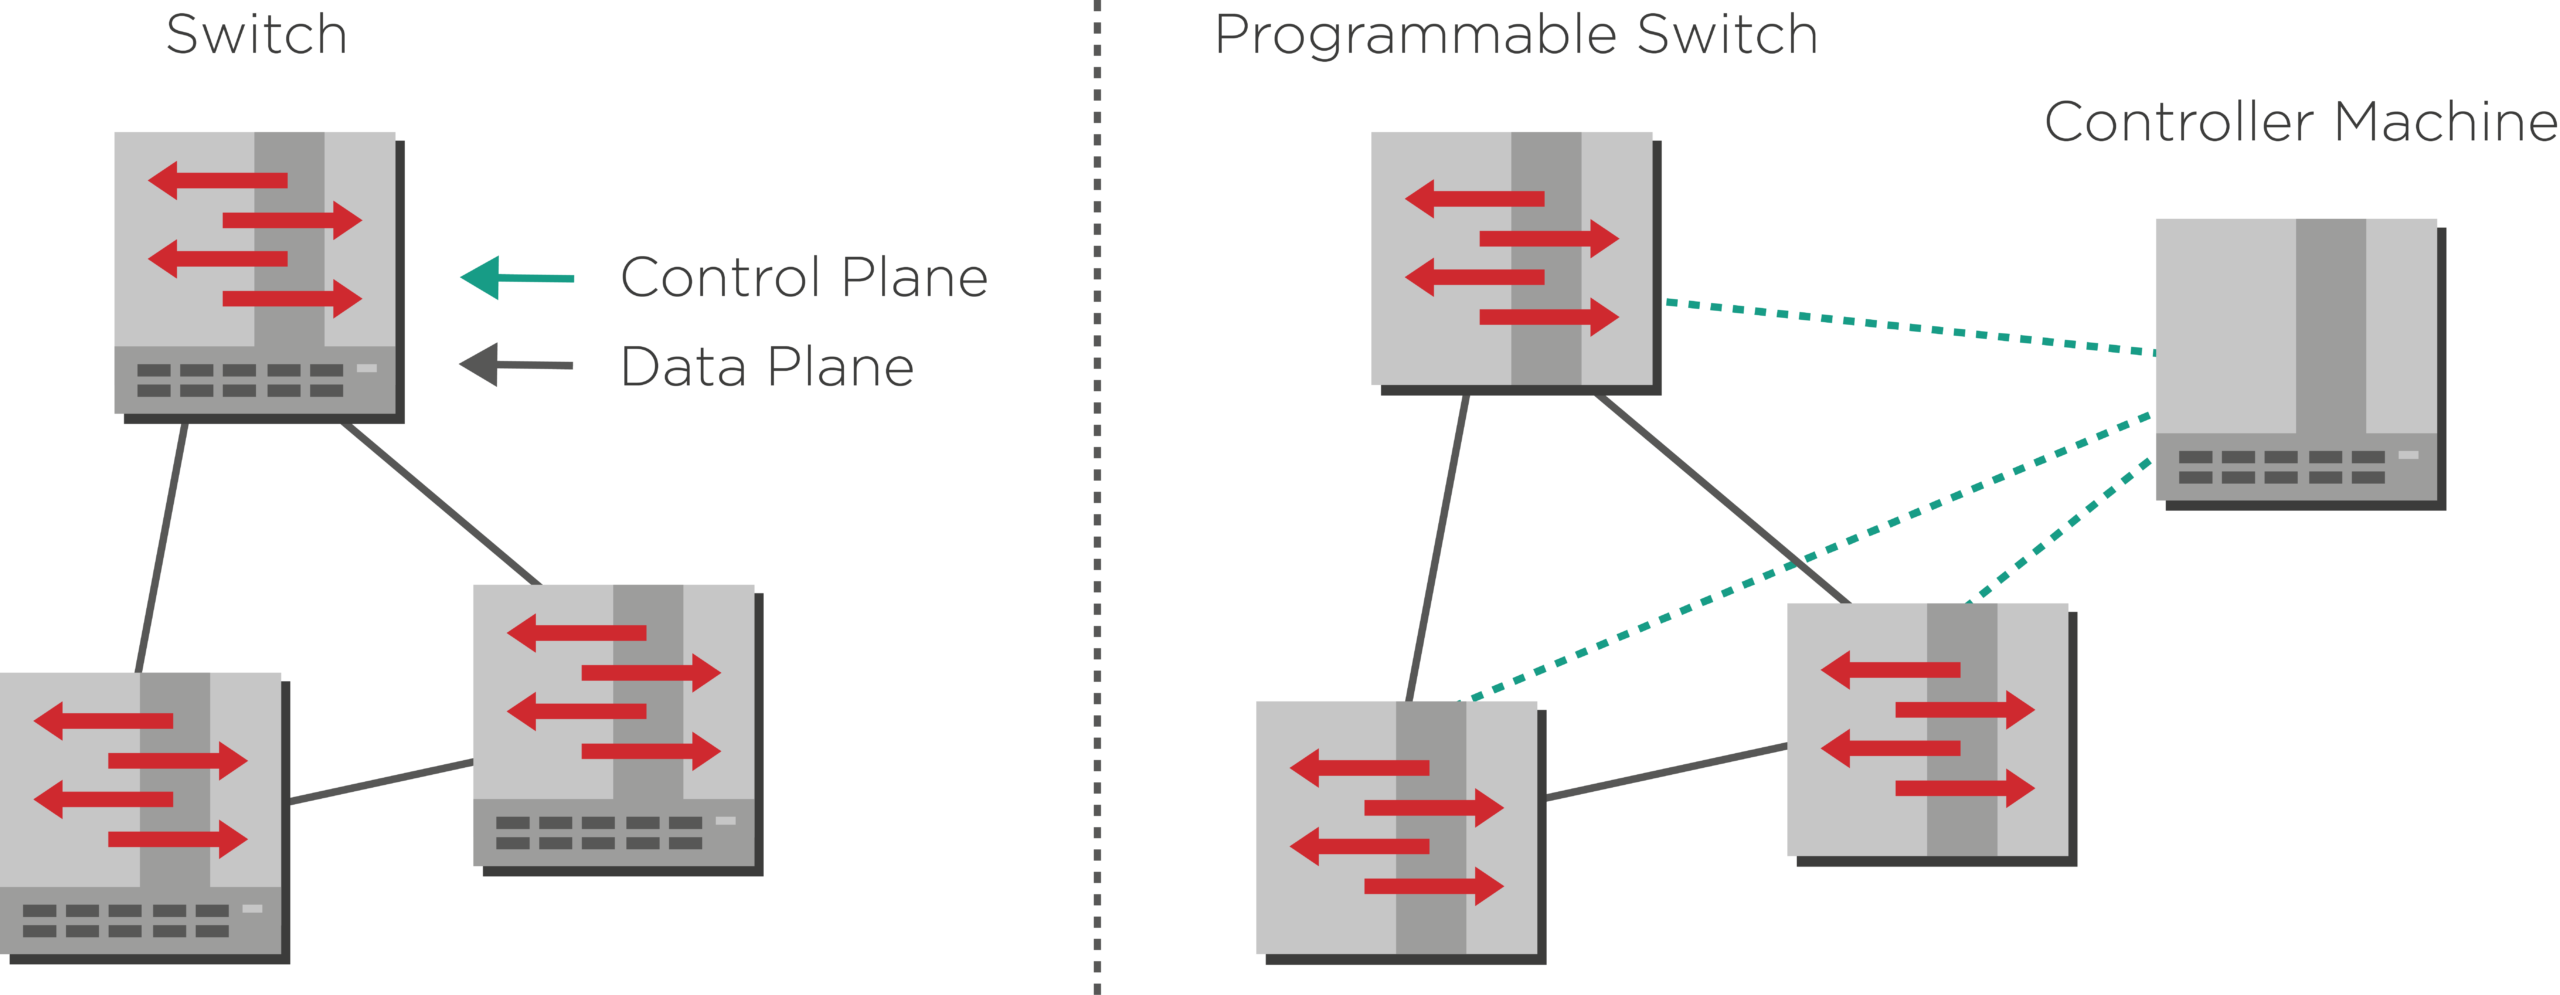 In a traditional network paradigm (left), switches contain both the hardware that forwards traffic (the data plane), as well as the software that sets the rules of where to forward said traffic (the control plane). The SDN paradigm (right) separates the switching hardware from the software, effectively decoupling the data plane from the control plane. The language between this controller and the switches is an open protocol, with OpenFlow being the most commonly used one. The Open ROADM initiative proposed its own open protocol called NETCONF.